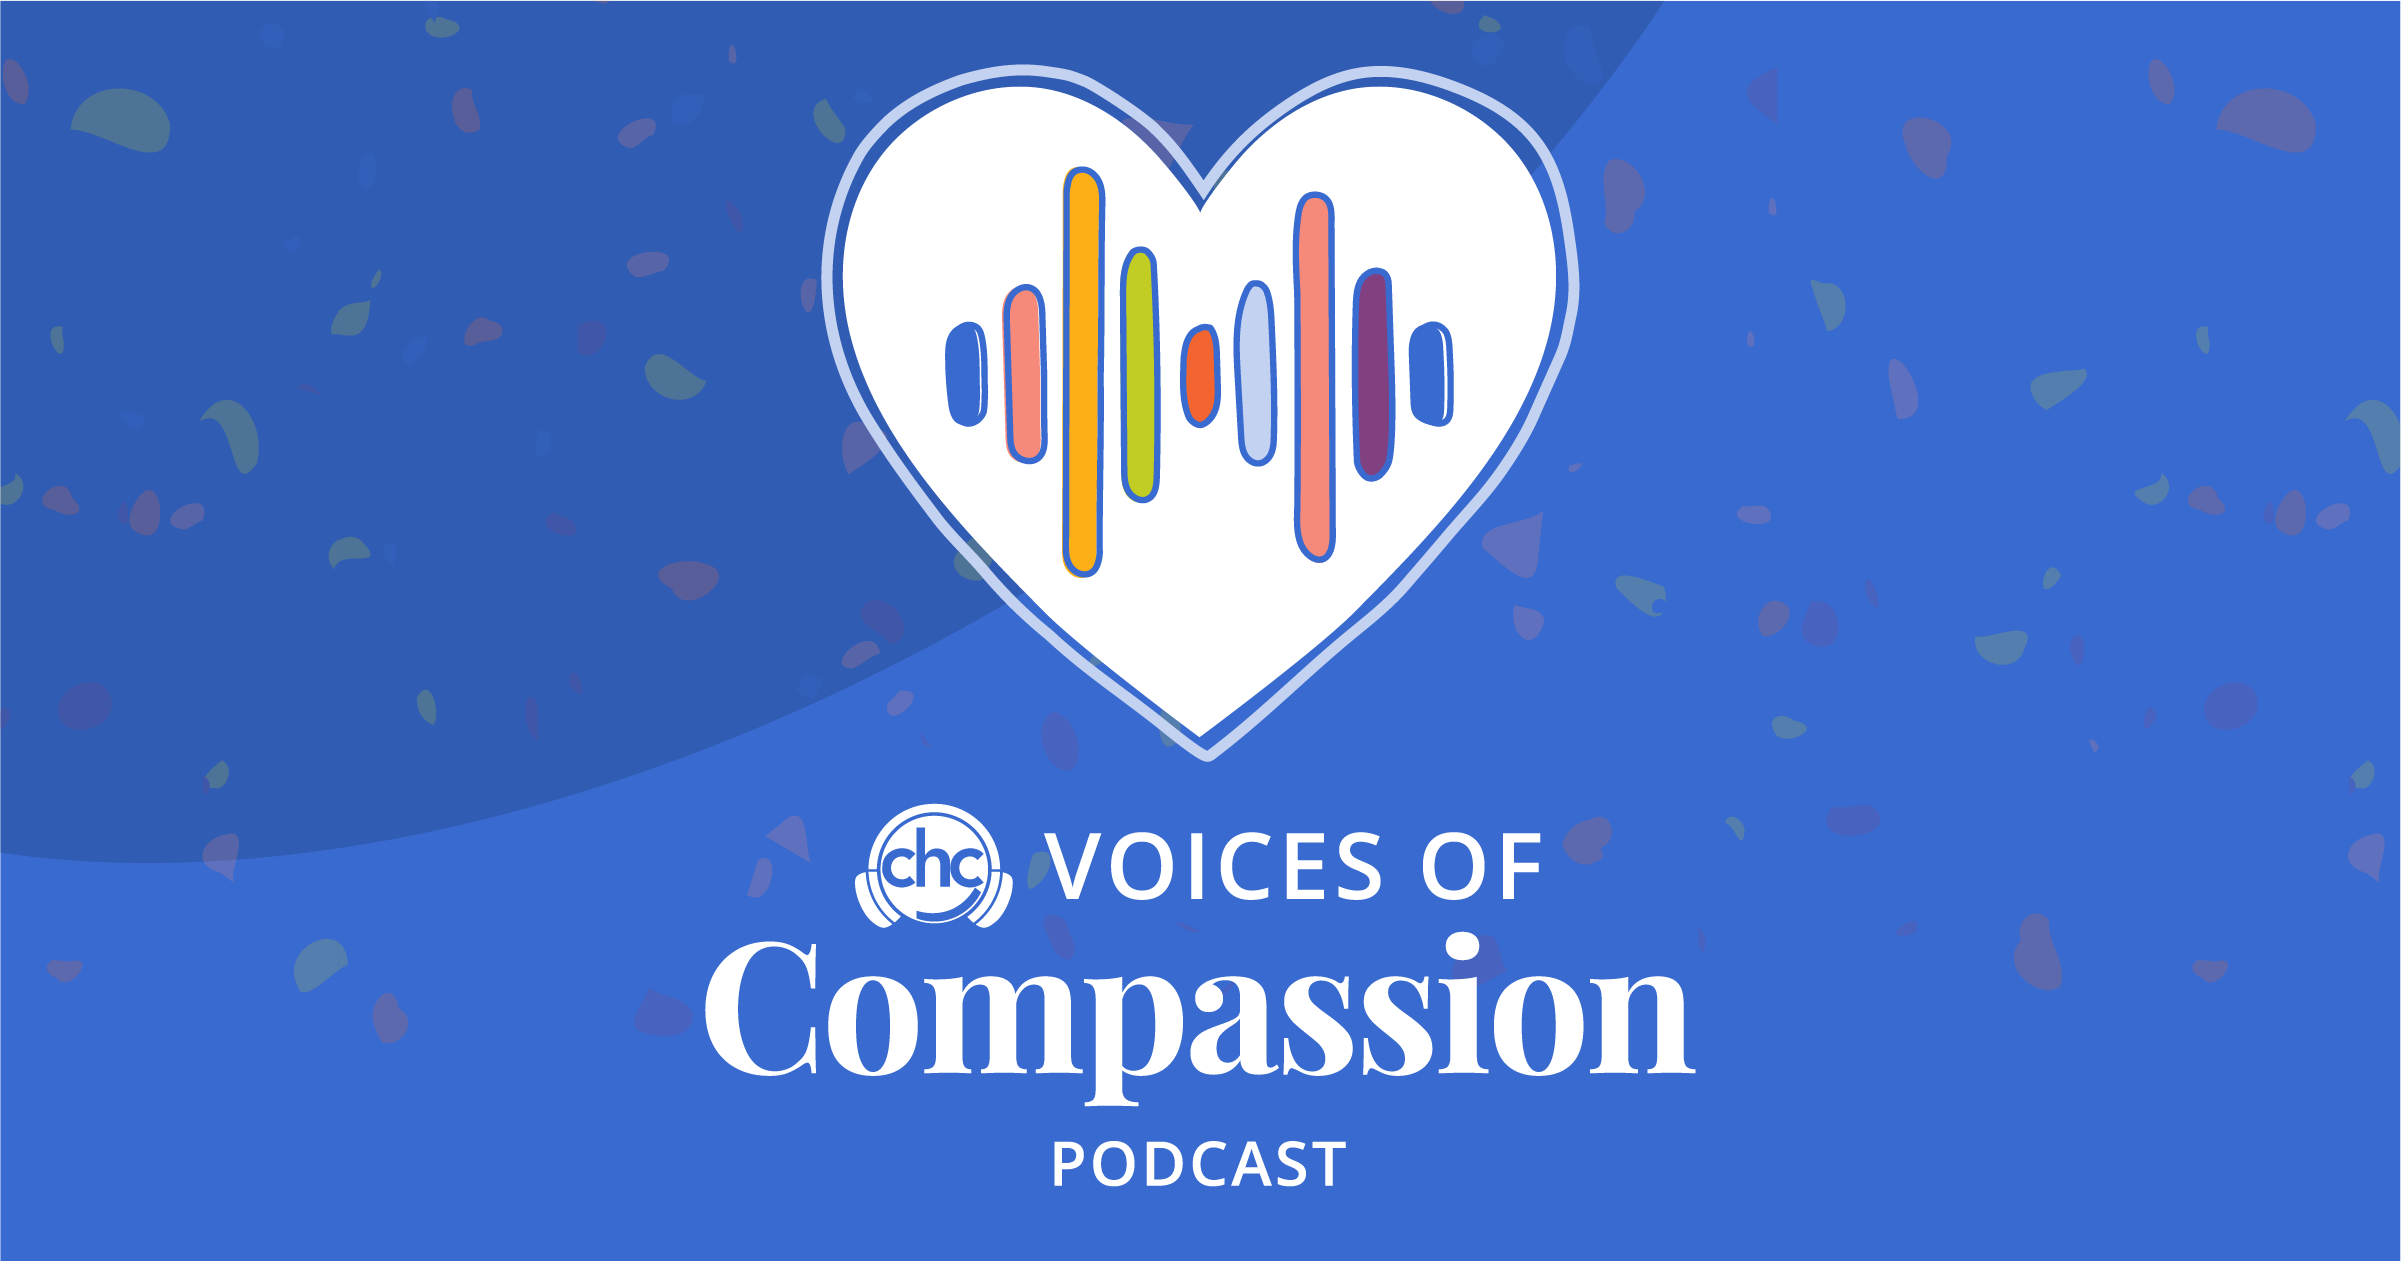 Home - CHC Podcasts presents Voices of Compassion | Children's Health Council